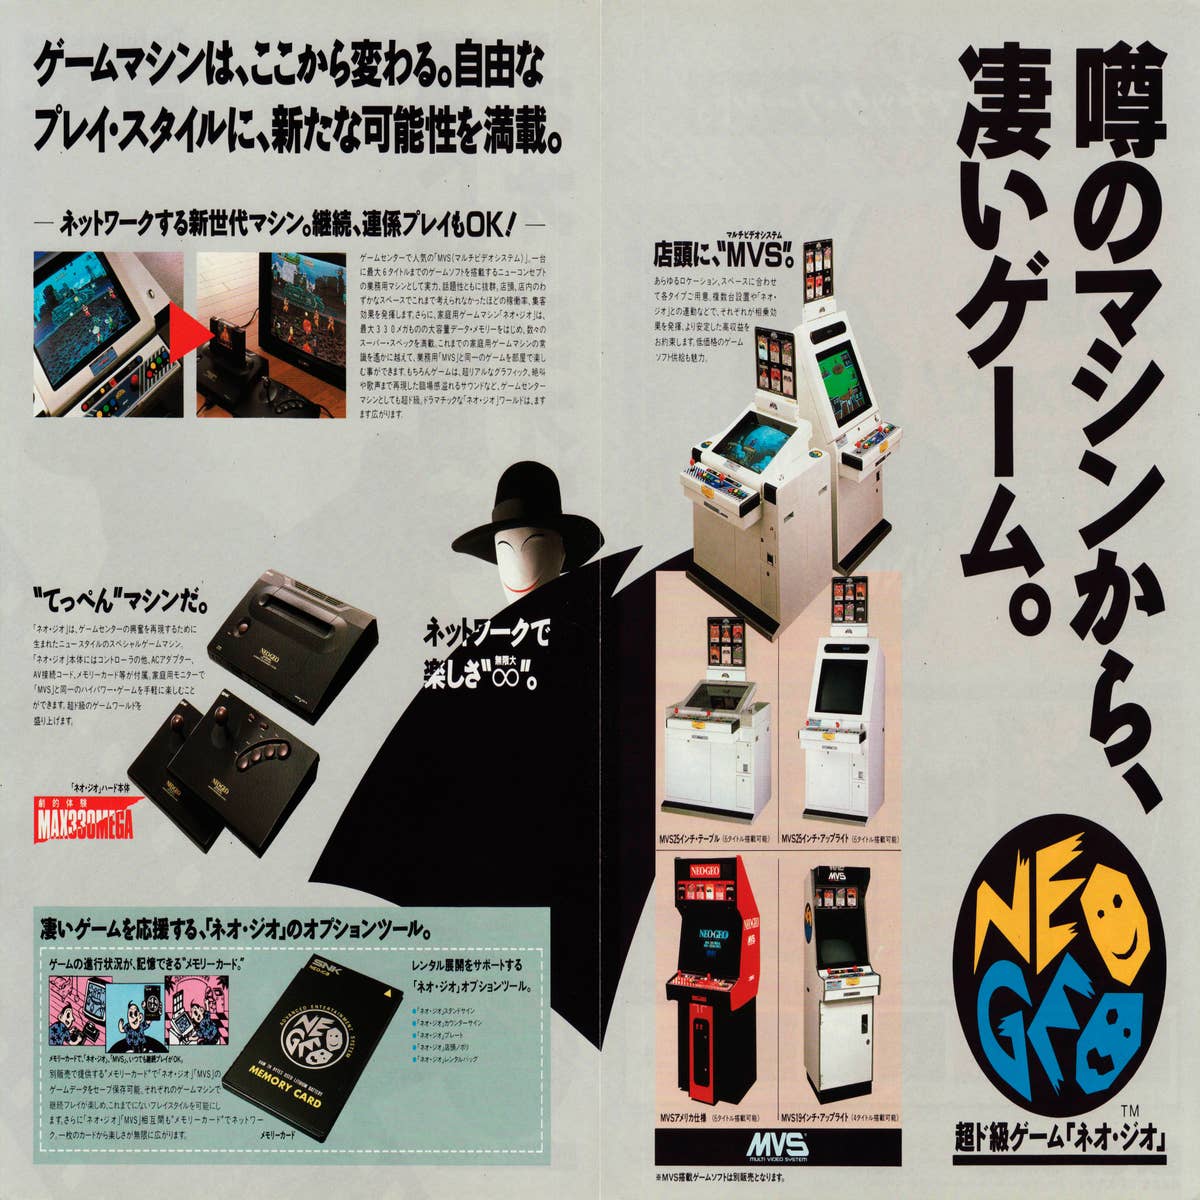 Neo Geo at 30: The Big Red Machine's Legacy Lives On